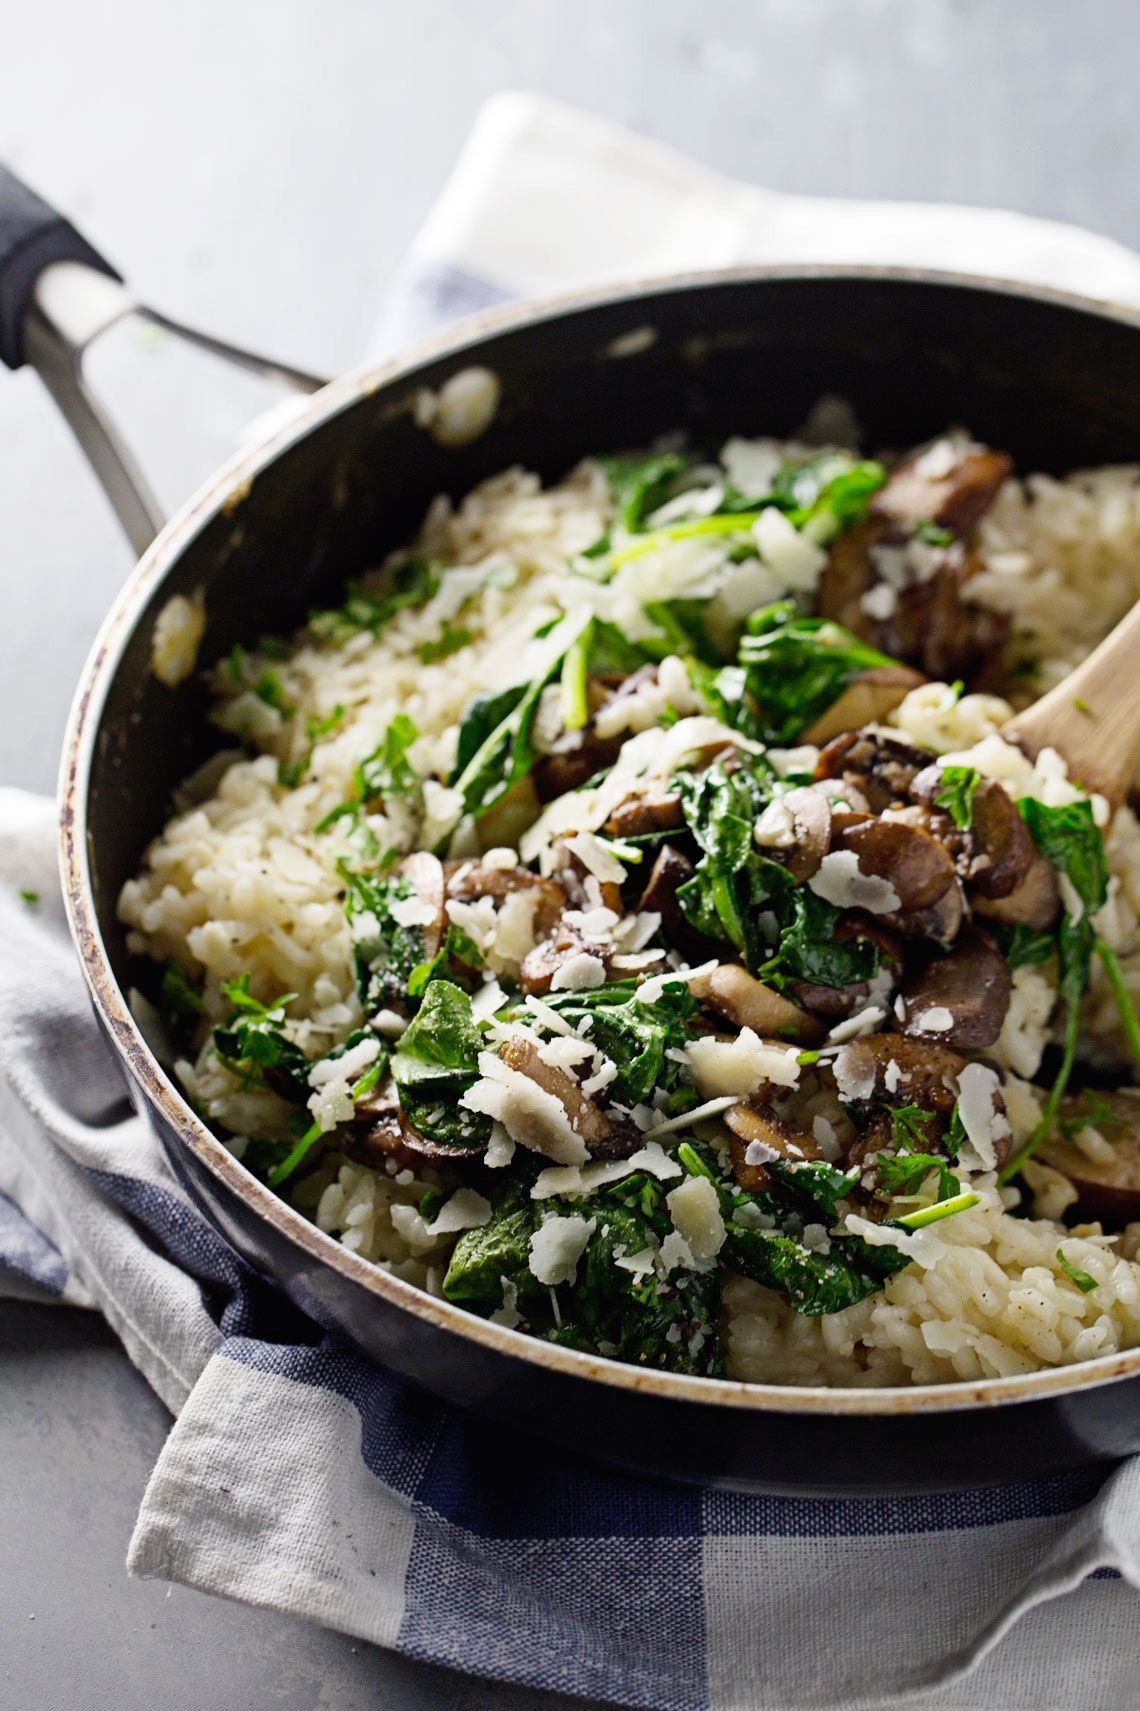 Garlic Butter Mushroom Risotto – A quick and easy weeknight meal! White wine, garlic, mushrooms, butter, spinach, and creamy